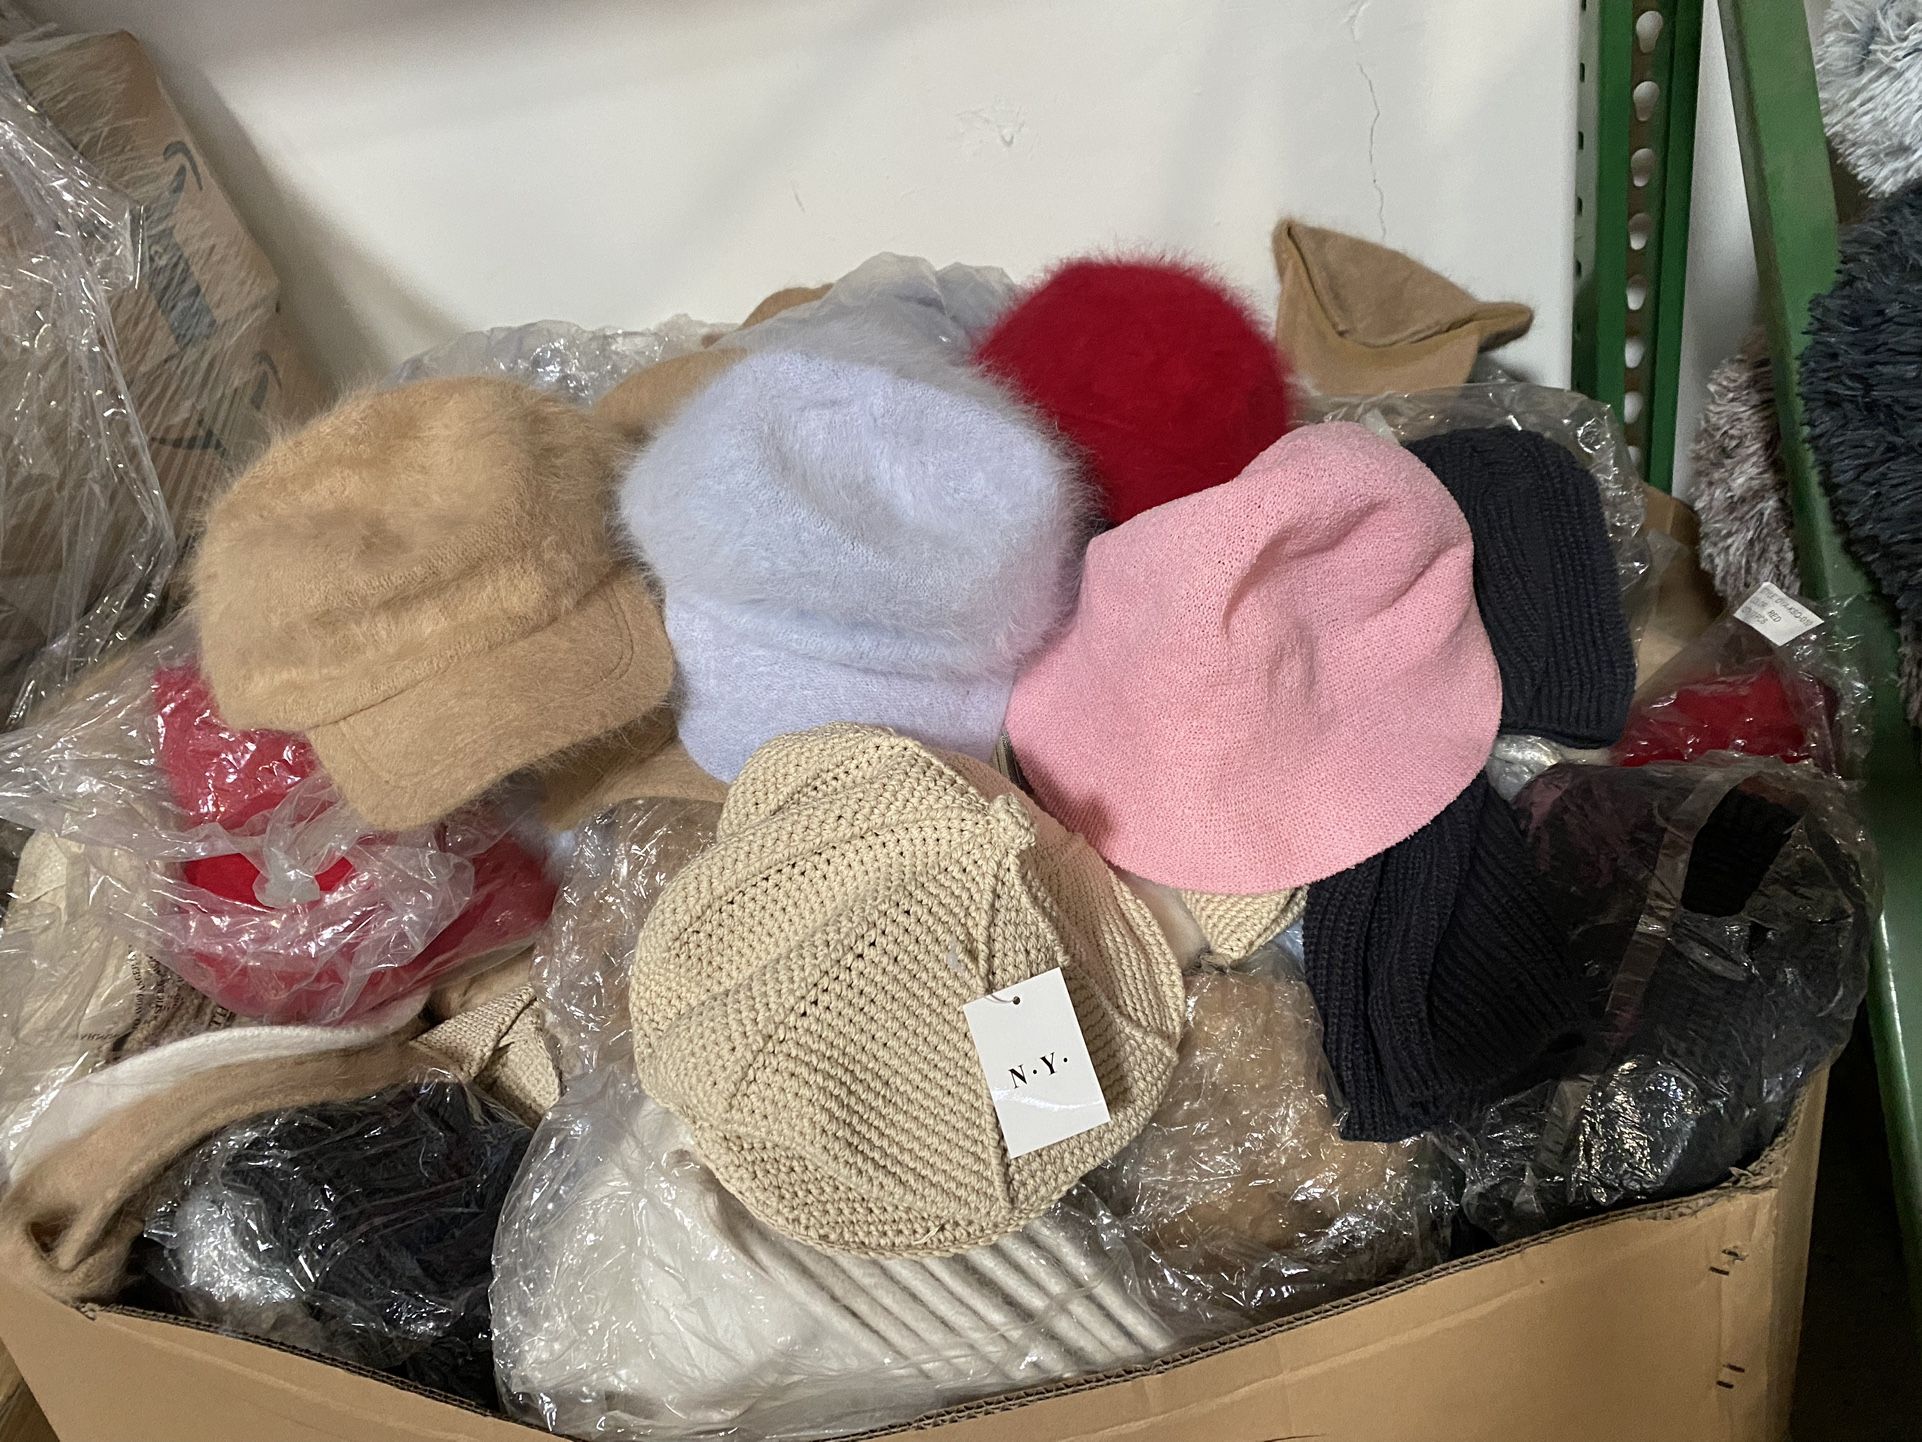 Dozens of new hats clearance